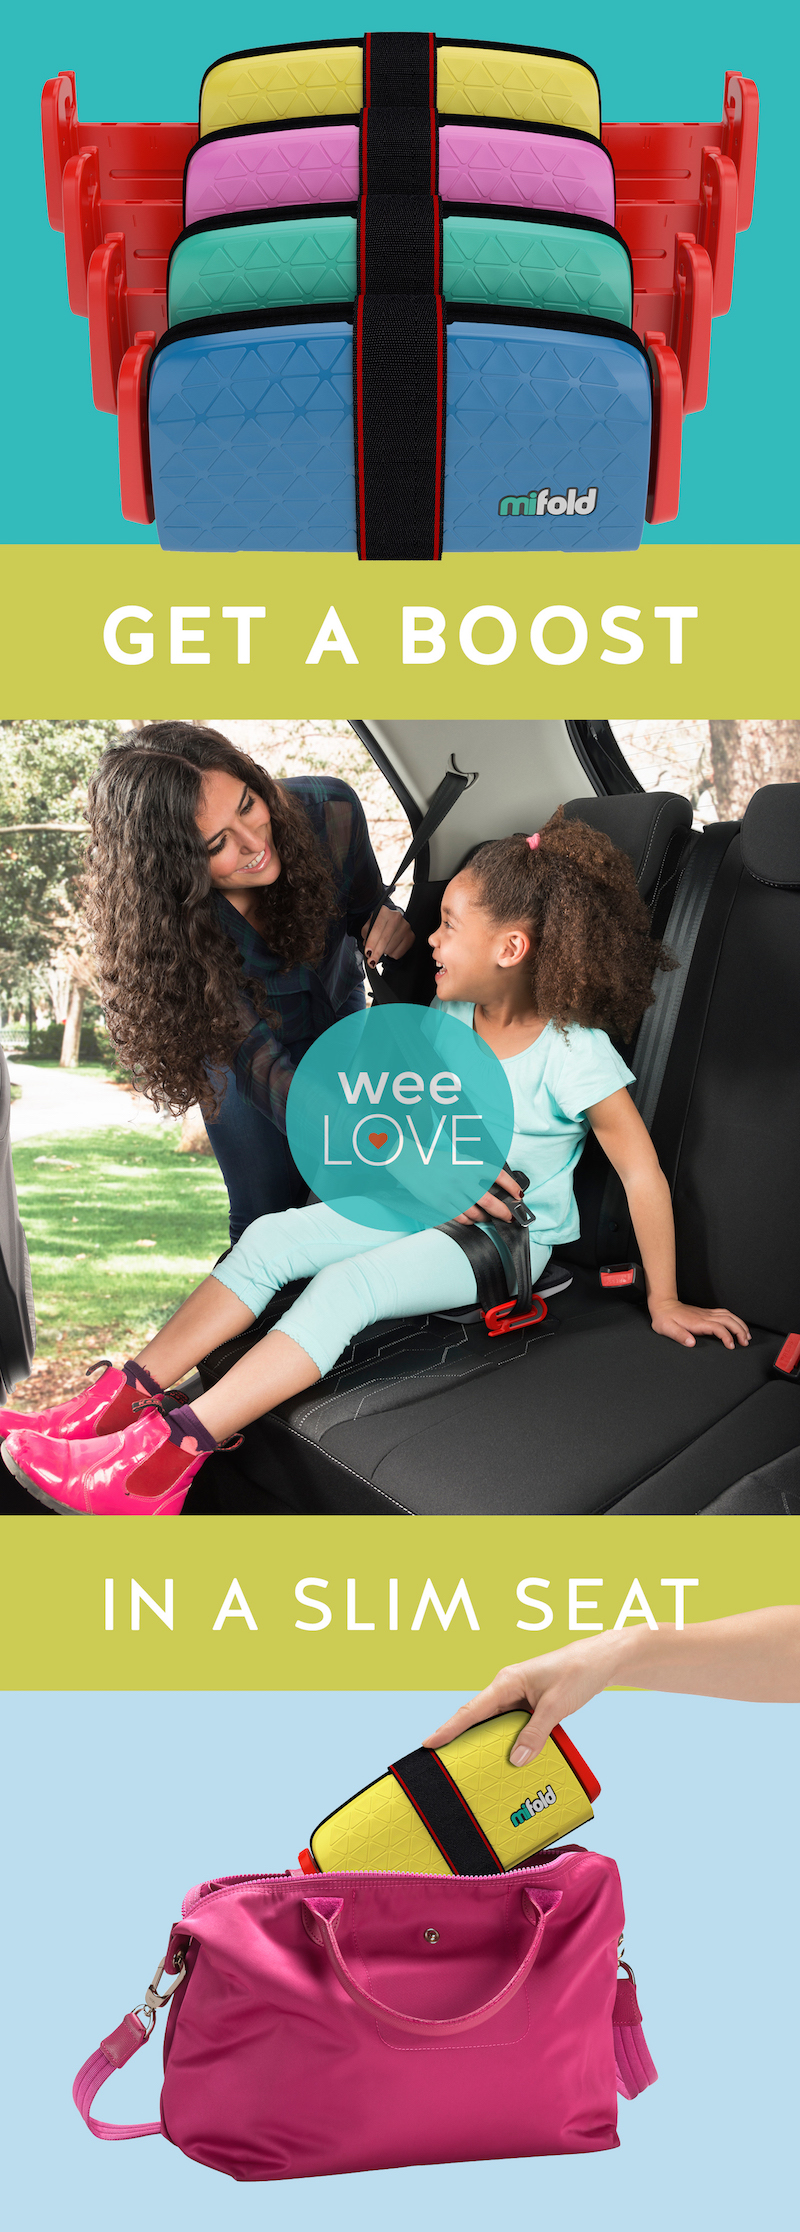 Image of woman buckling child into the car using Mifold booster seat